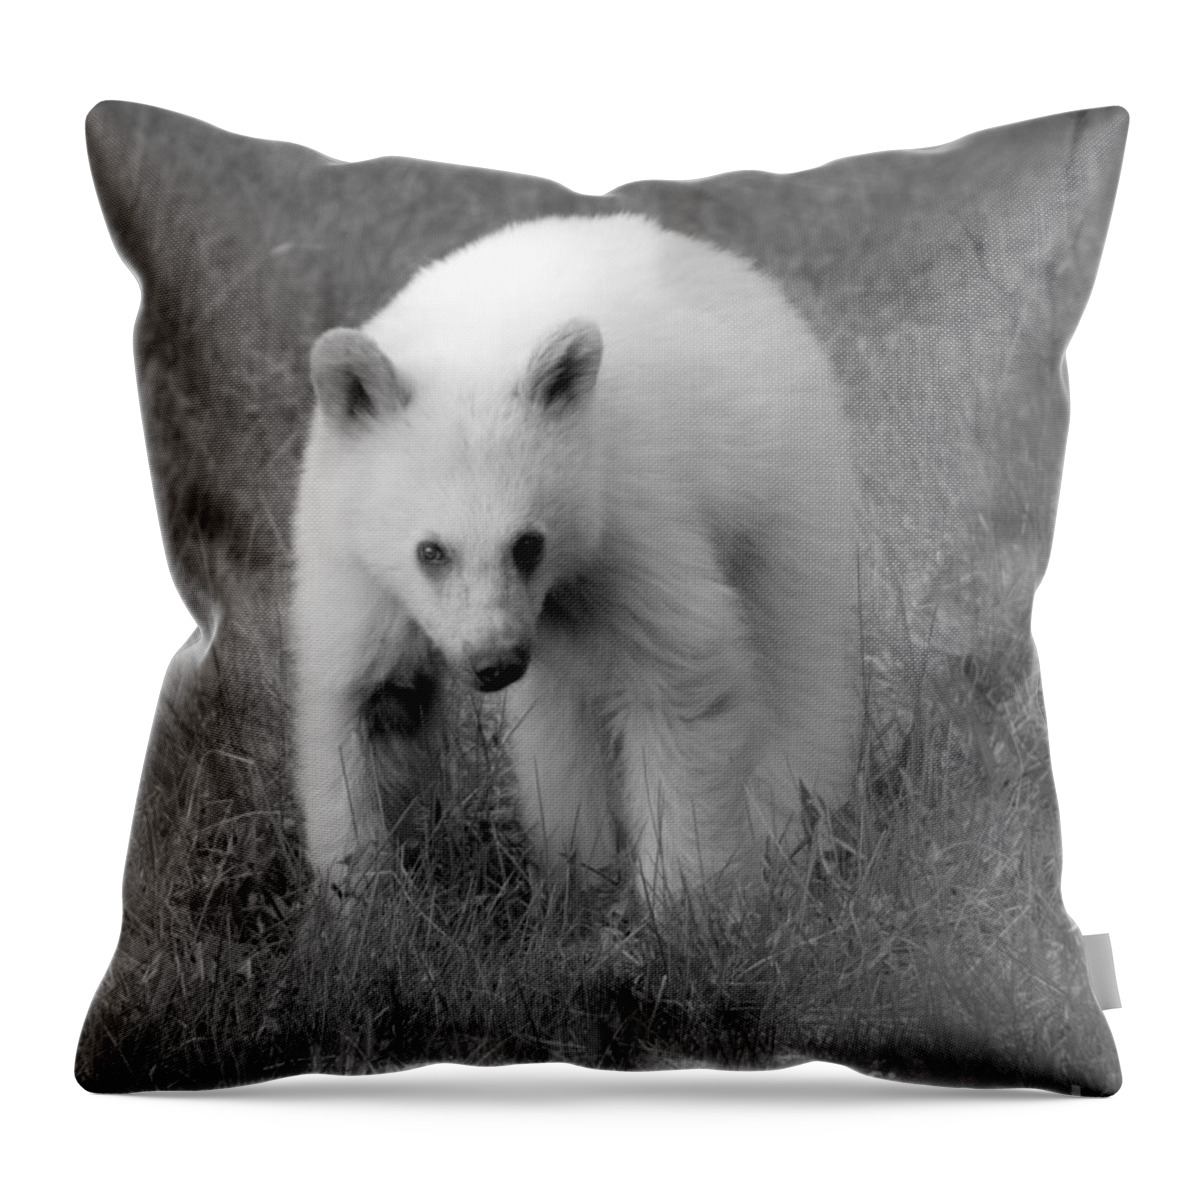 White Bear Throw Pillow featuring the photograph Wandering White Black Bear Cub Closeup Black And White by Adam Jewell